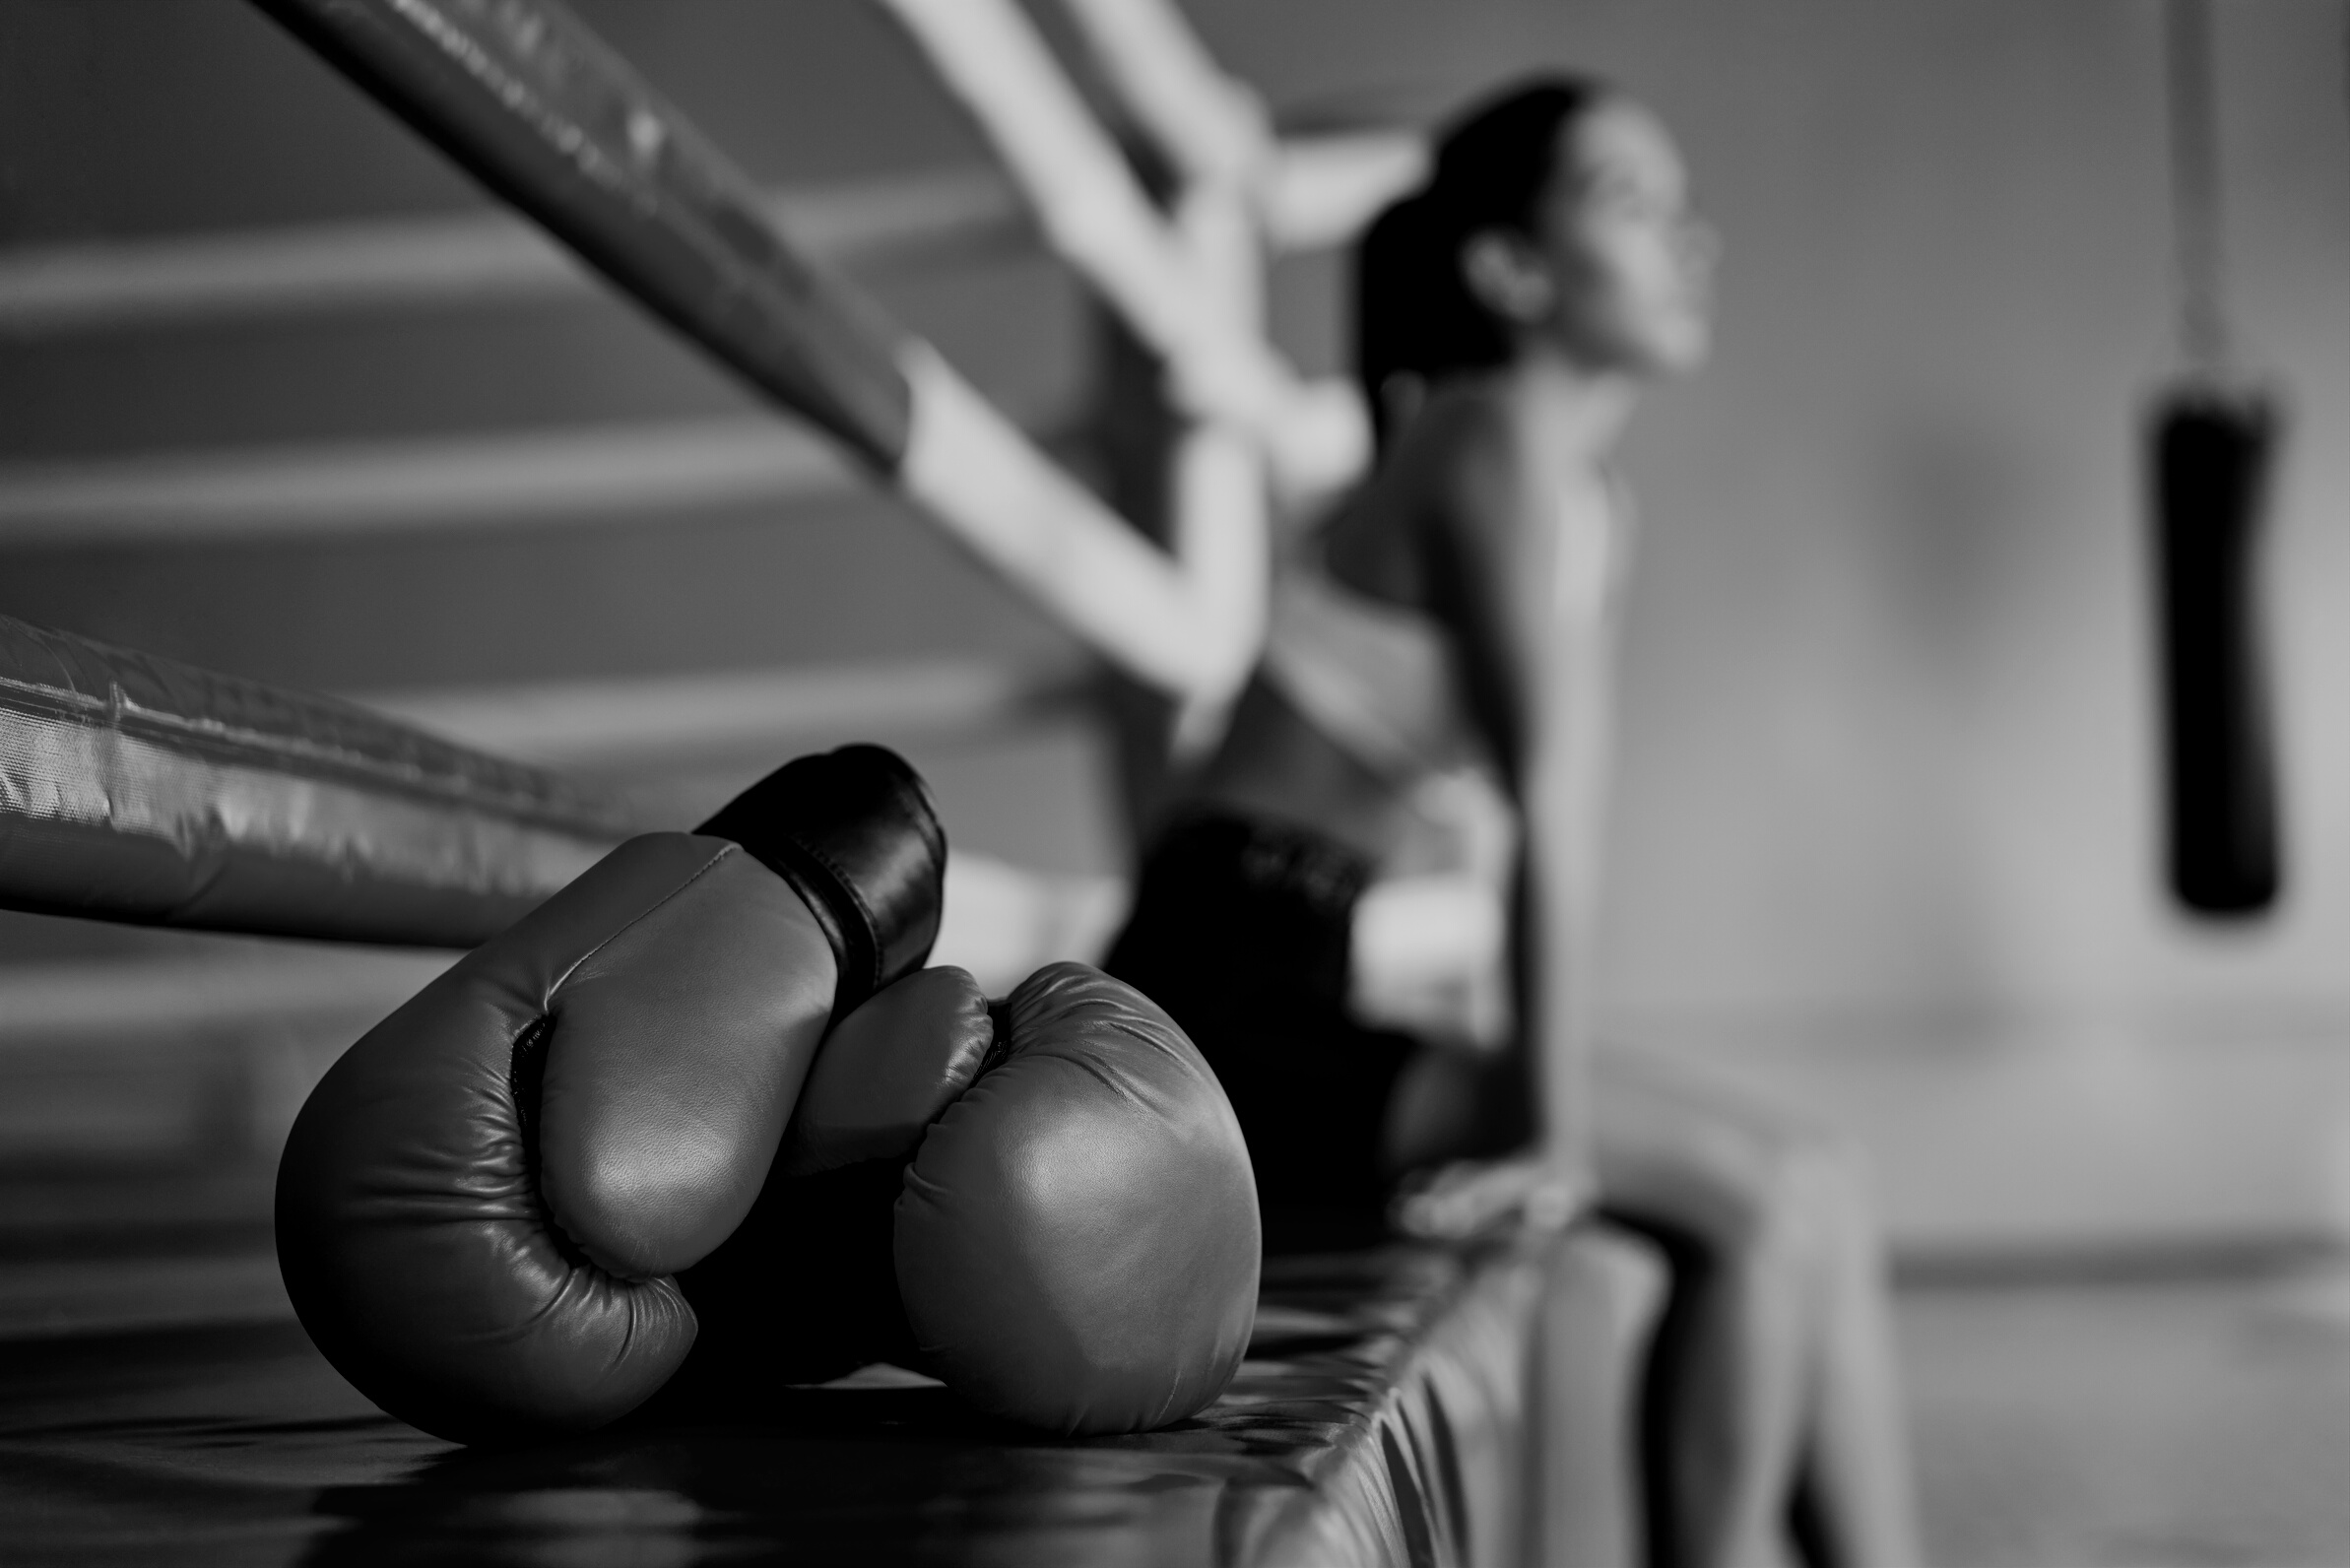 Red Boxing Gloves on Boxing Ring in Gym